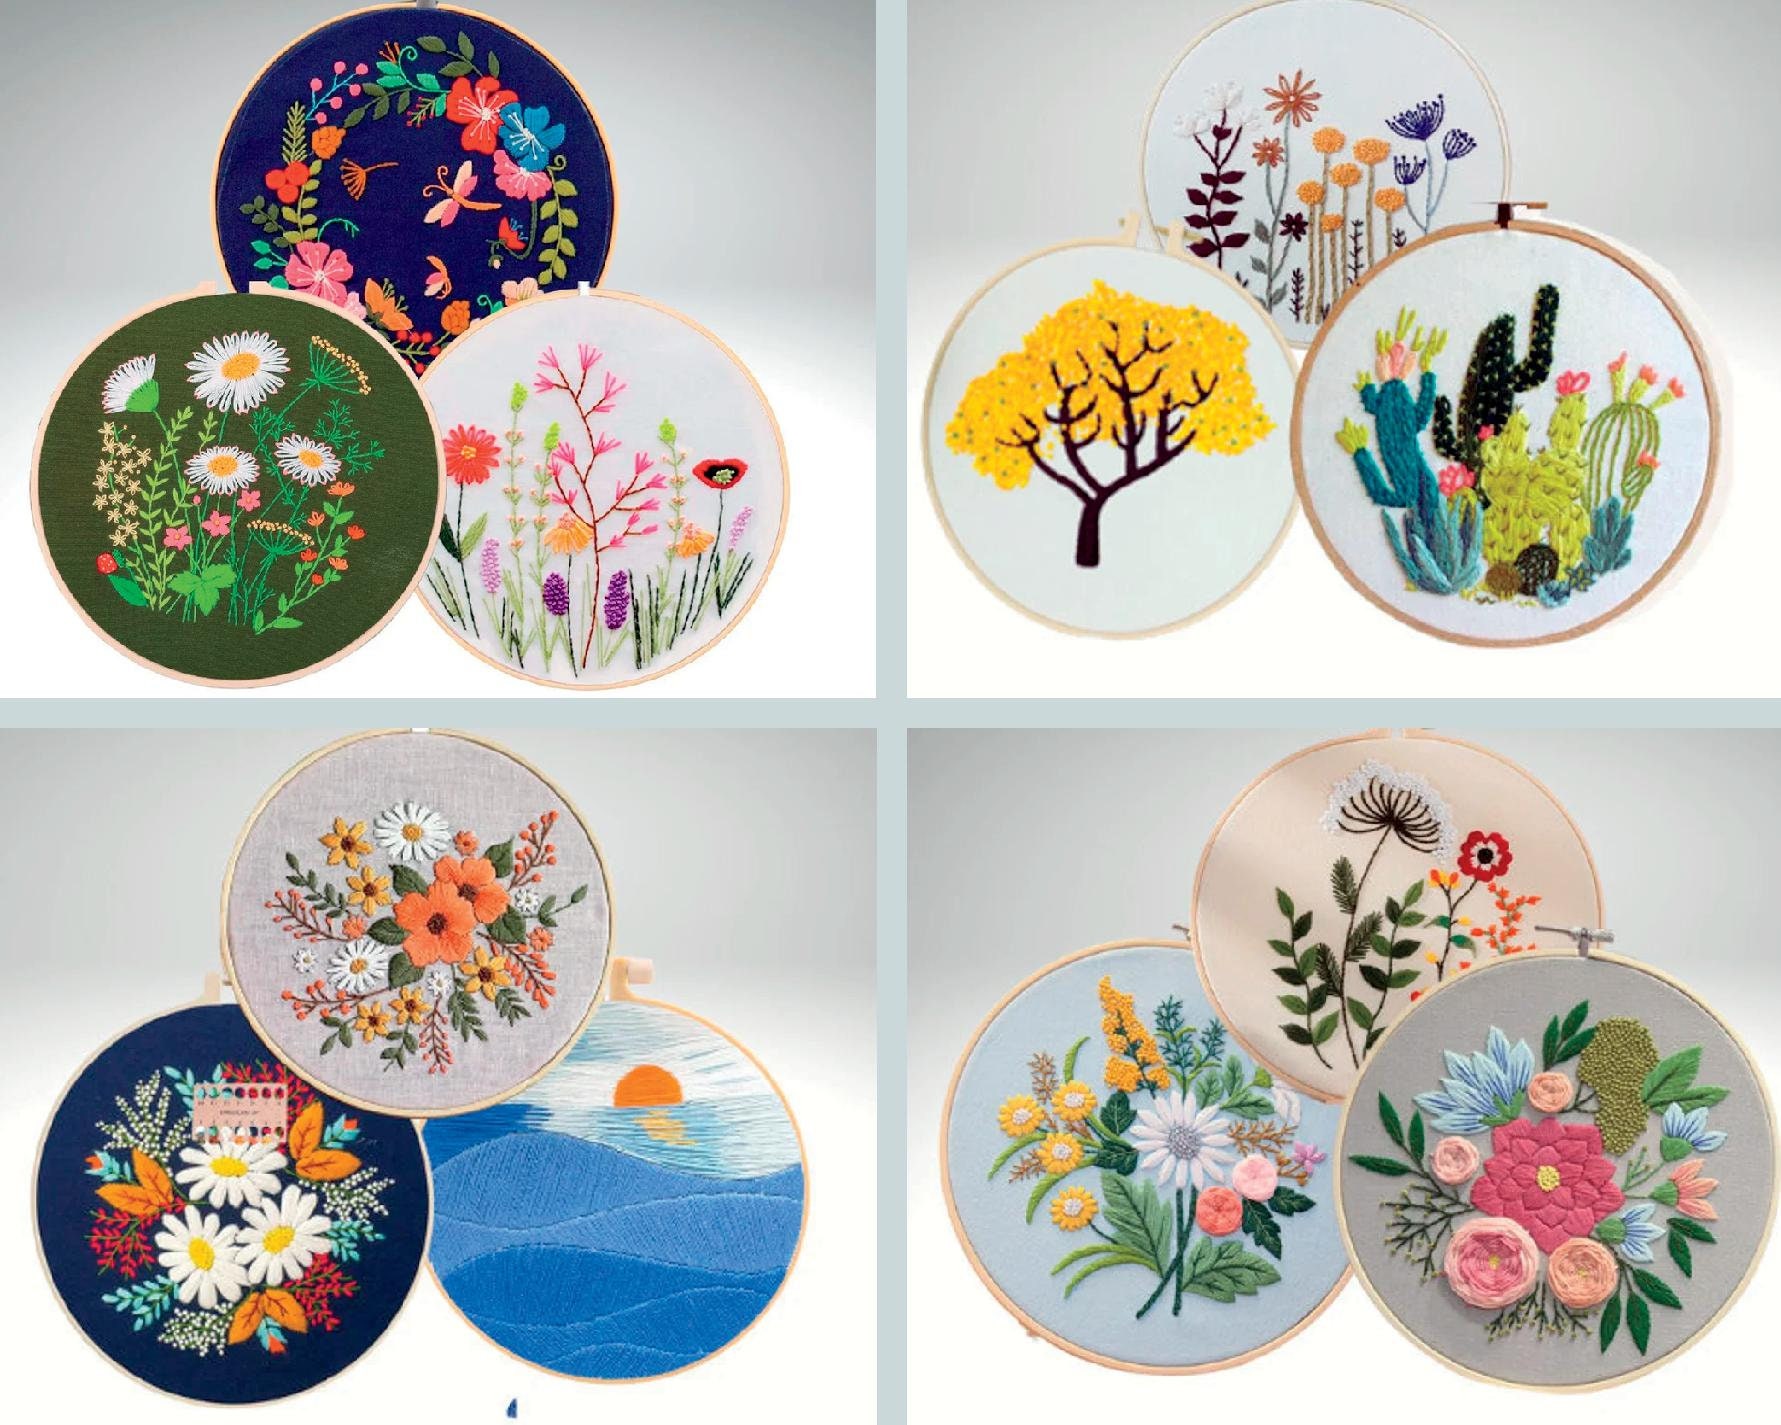 25 embroidery kits and patterns for beginners - Gathered